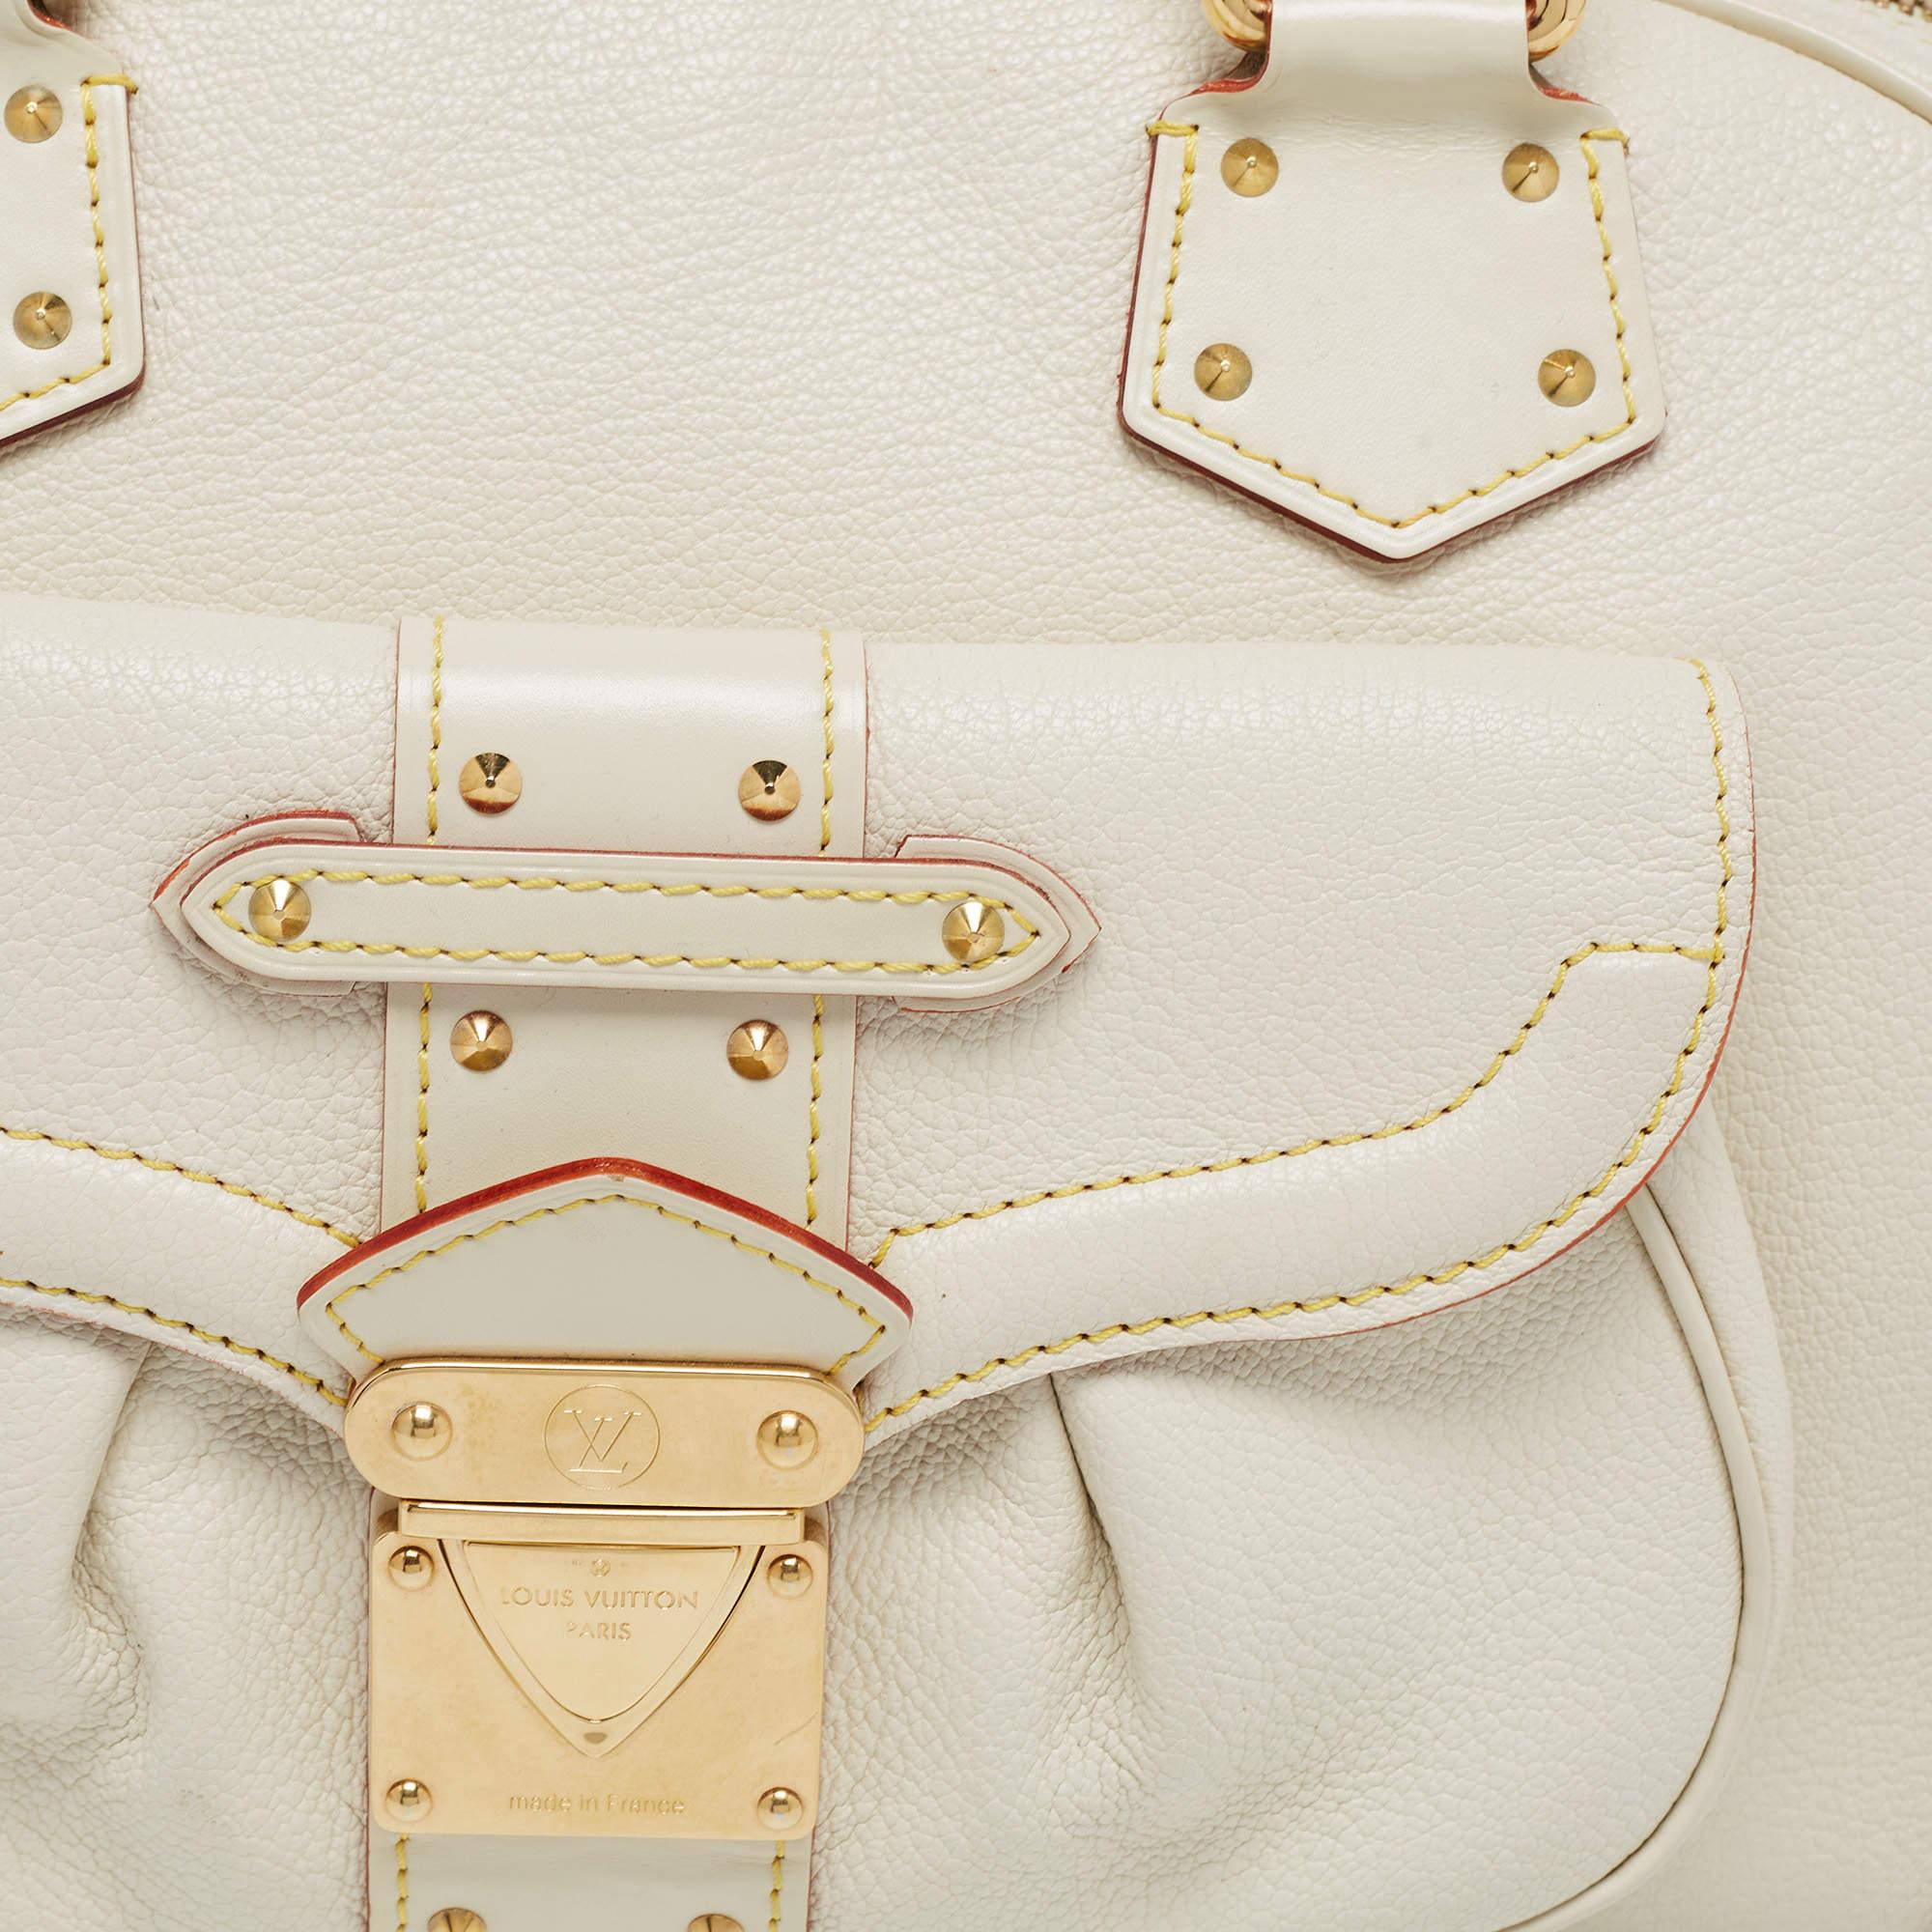 Louis Vuitton Ivory Suhali Leather Limited Edition Le Superbe Bag 2